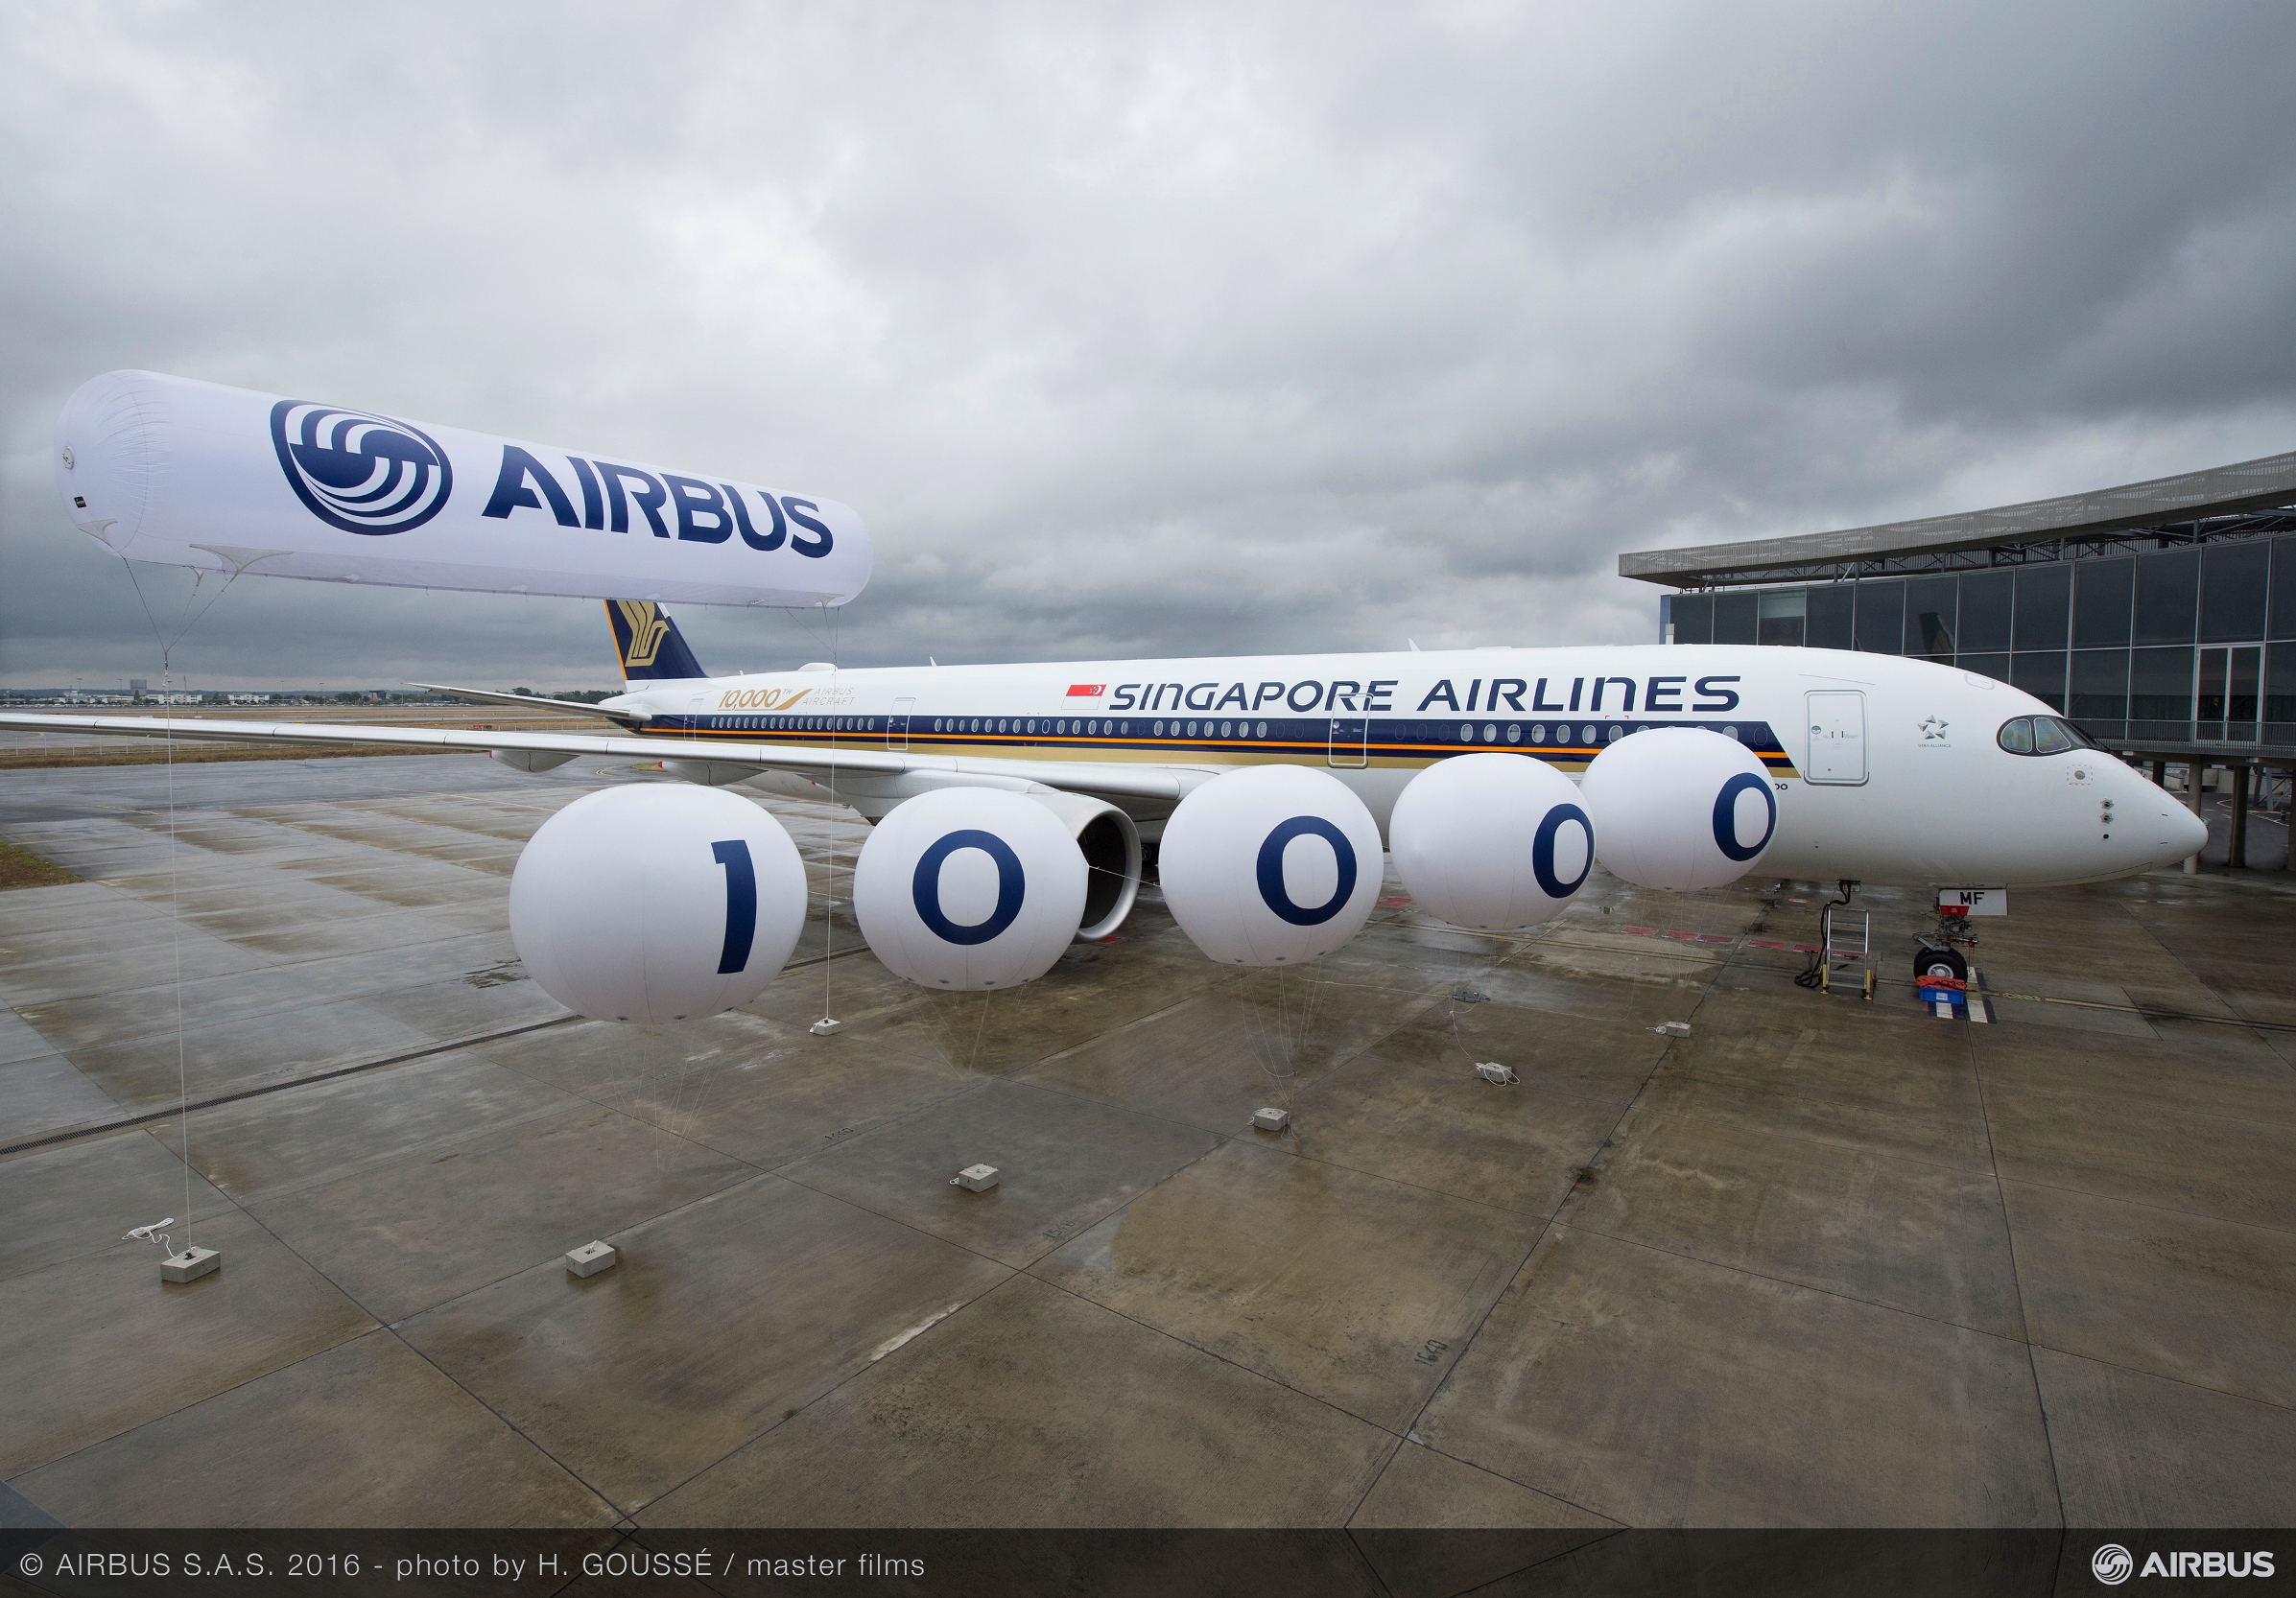 Airbus 10,000 aircraft deliveries and counting